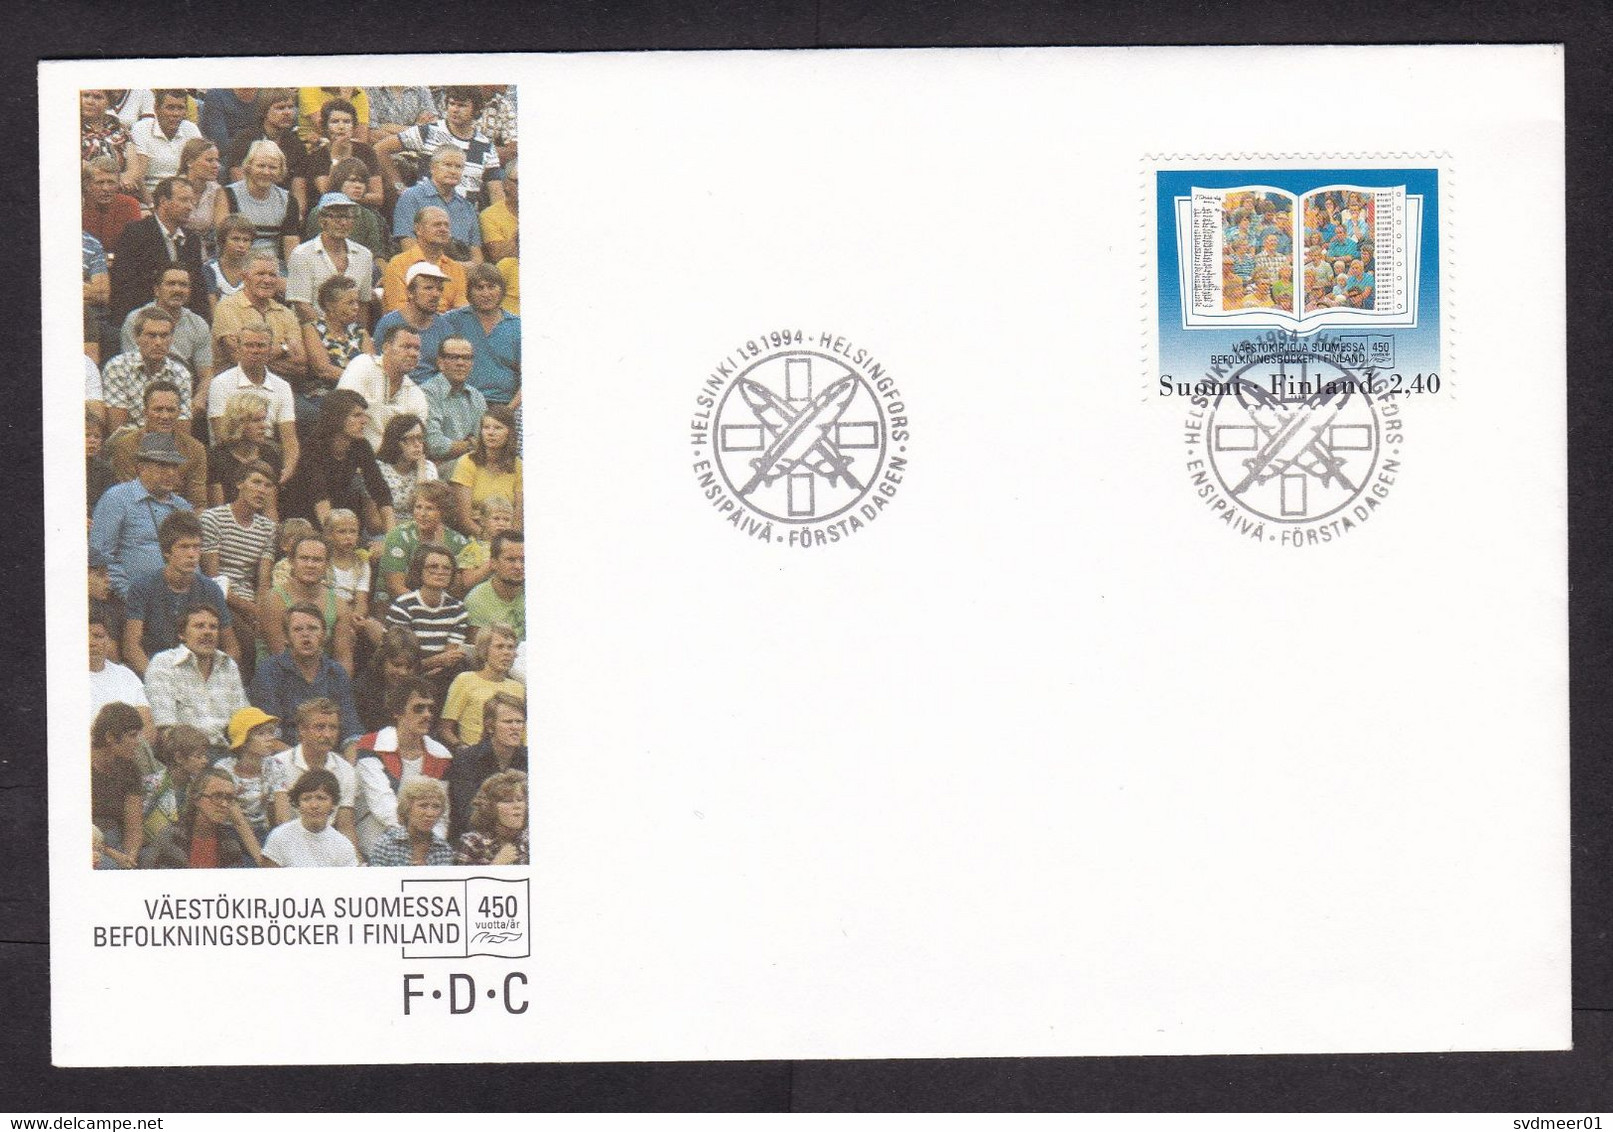 Finland: FDC First Day Cover, 1994, 1 Stamp, Population Registry Book, People Register (very Minor Crease) - Lettres & Documents